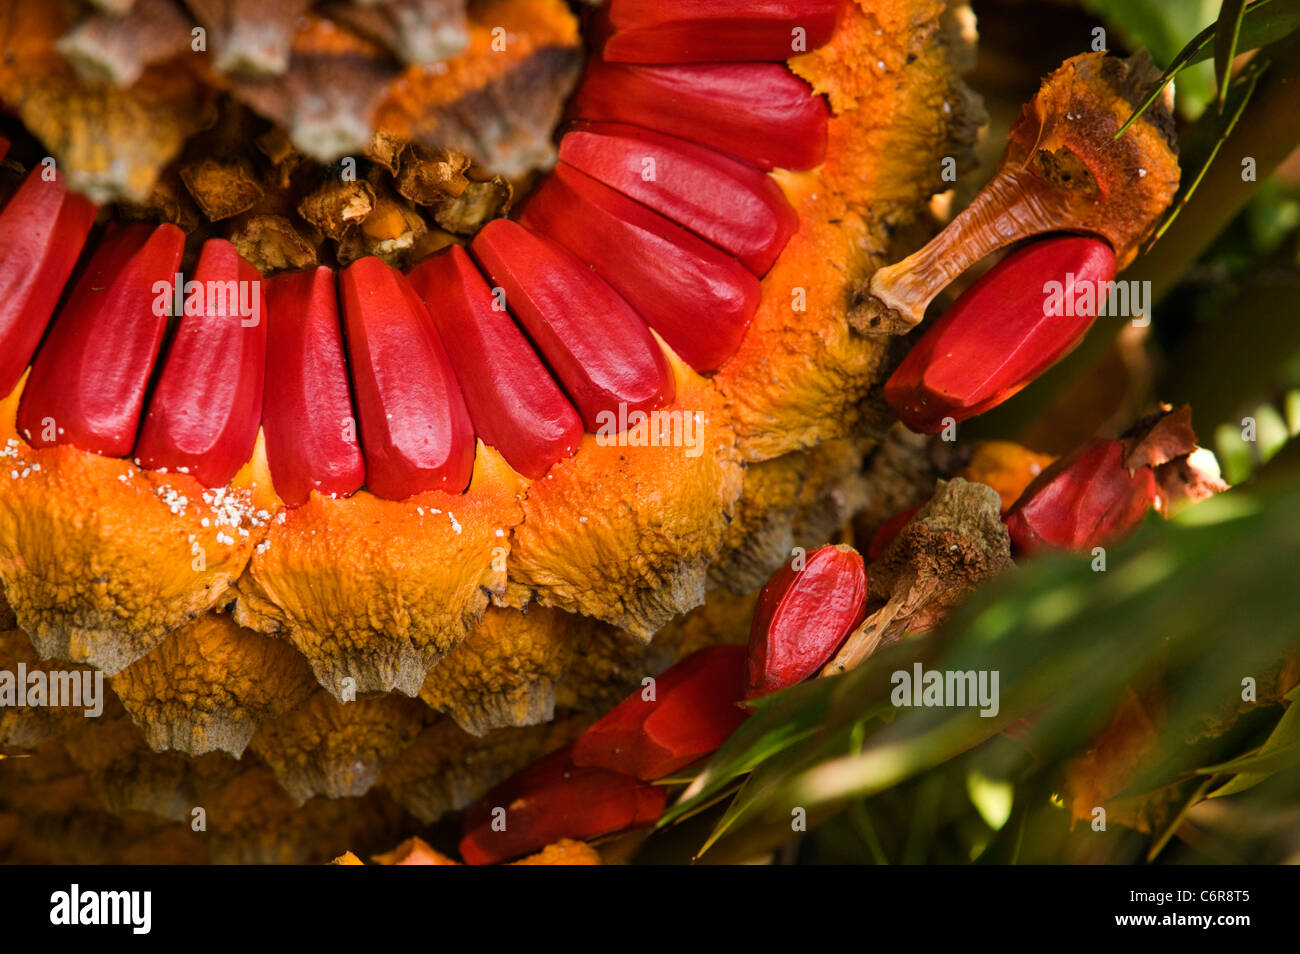 Close-up of Cycad with Seed cone spilling bright red seeds Stock Photo